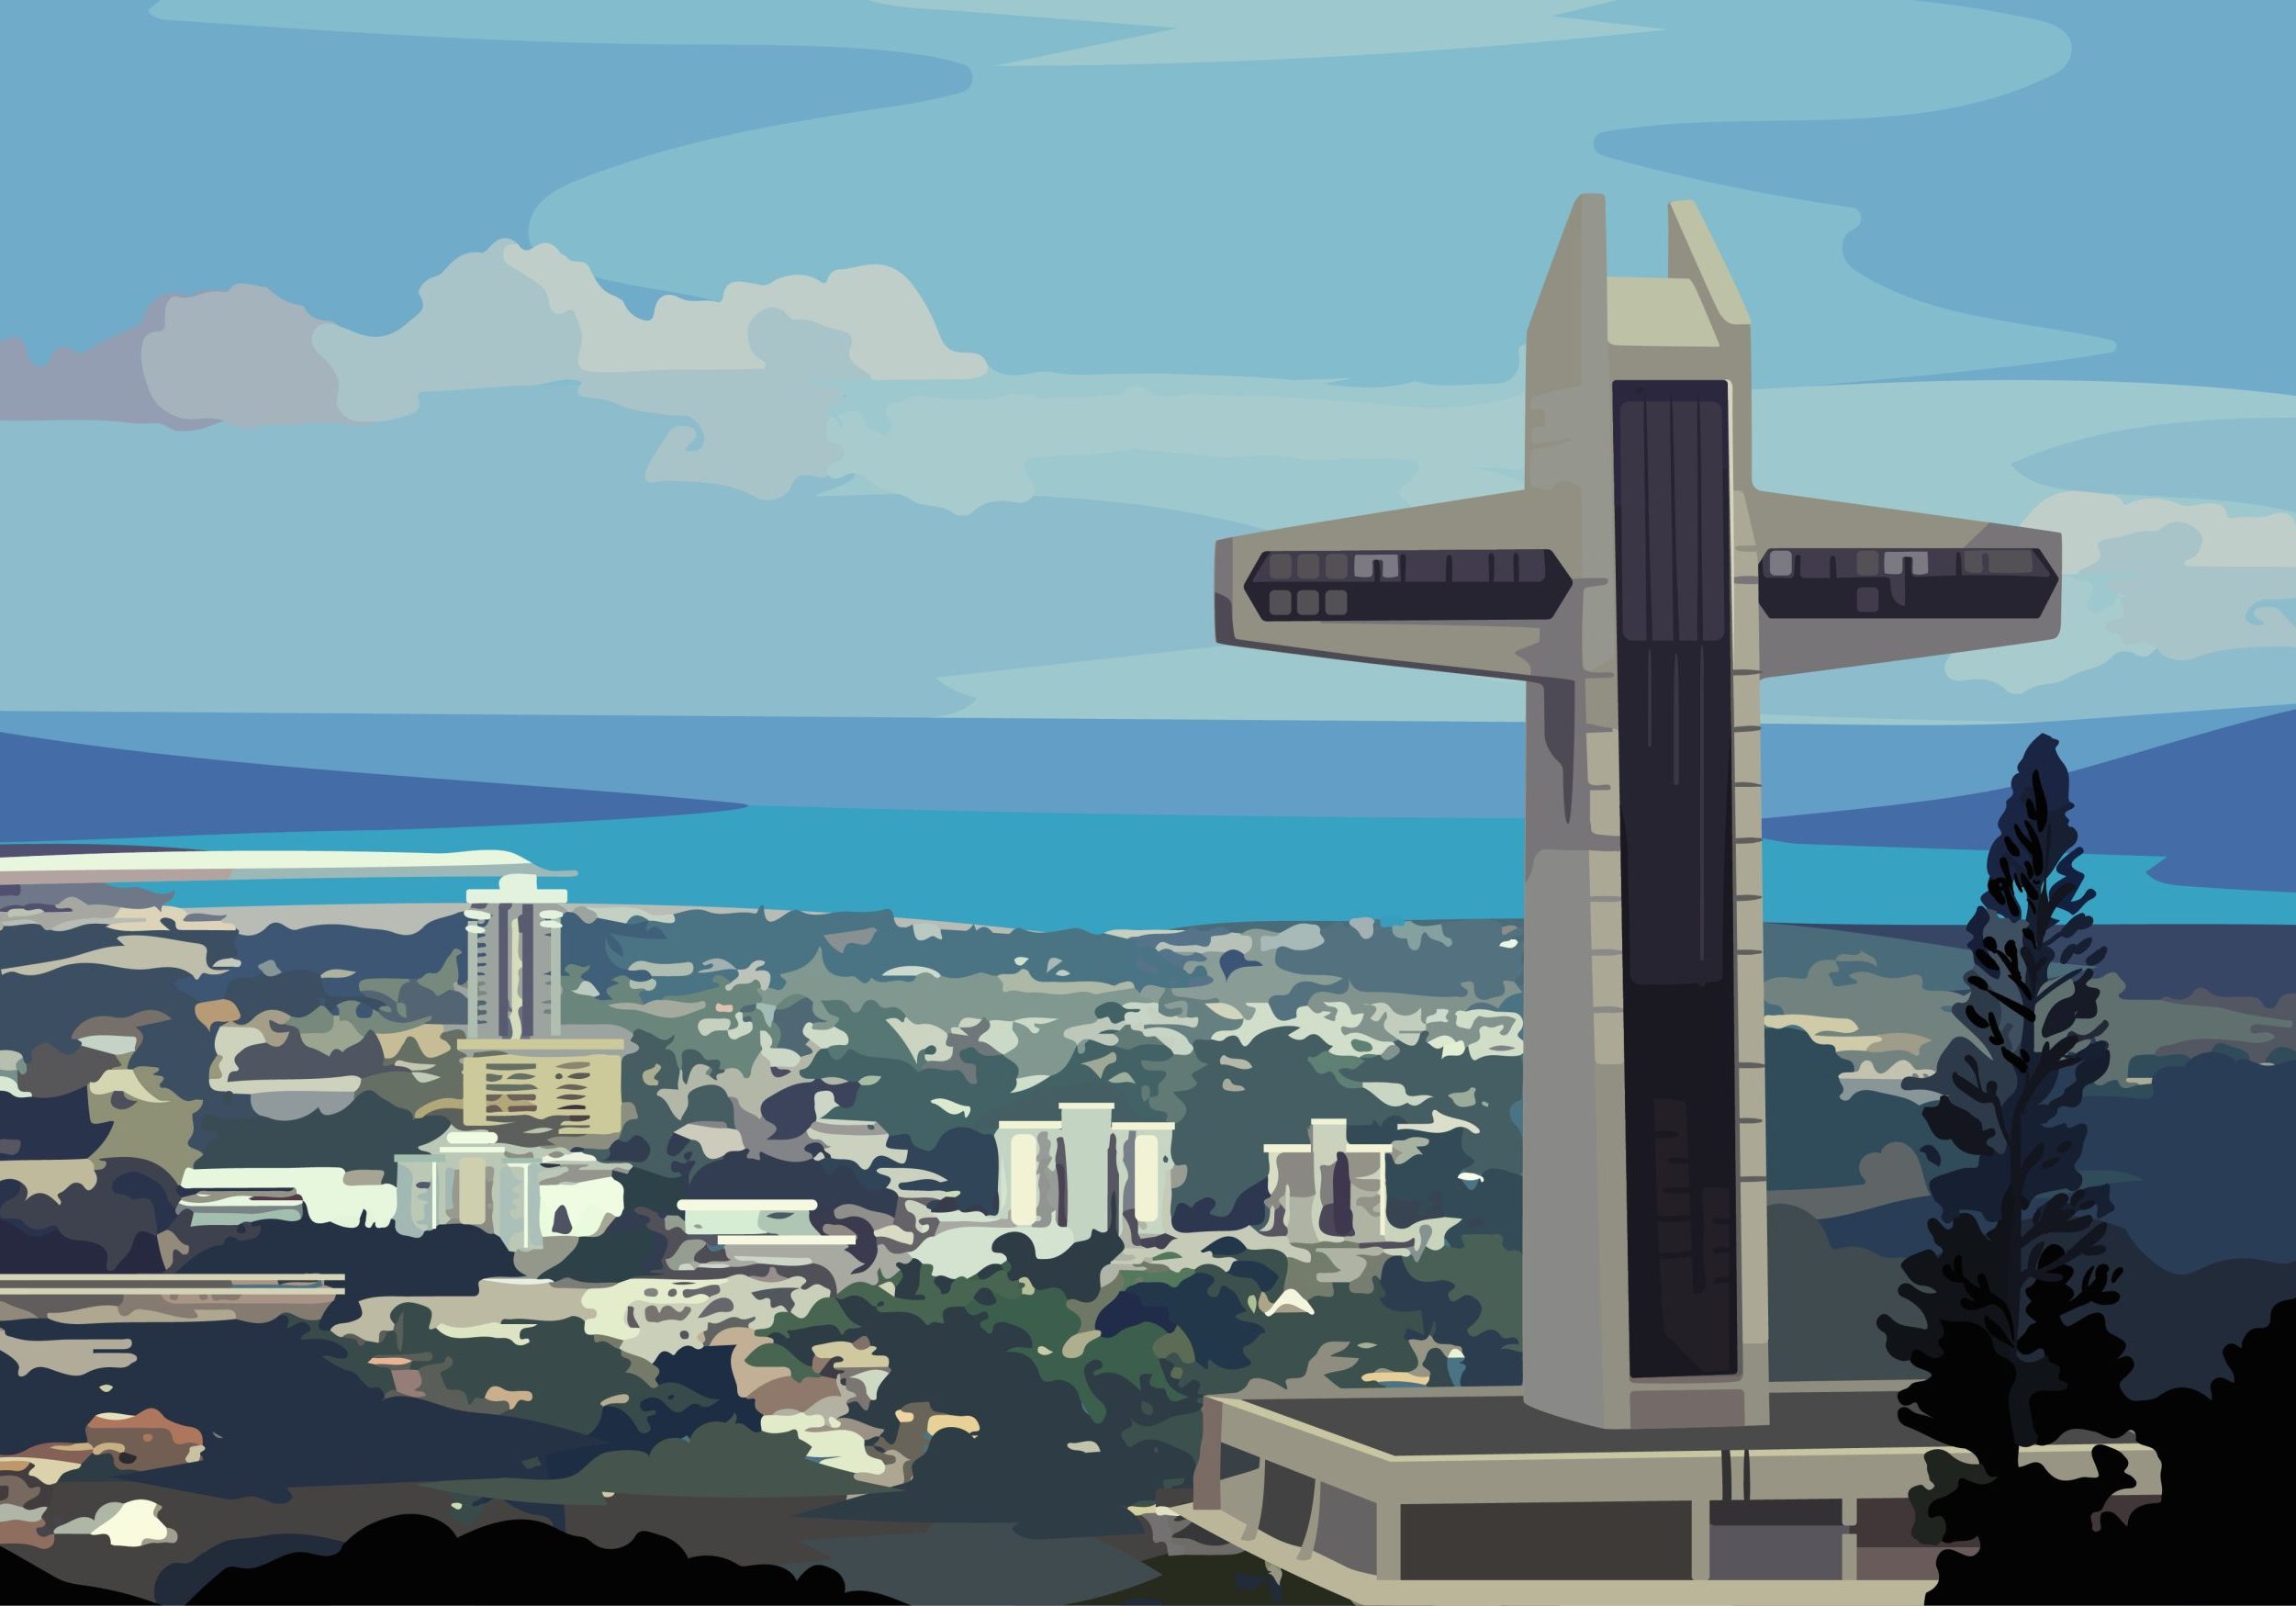 A Stylized Illustration Of A Cityscape With A Prominent Cross Shaped Monument Overlooking The Urban Area And The Coastline.